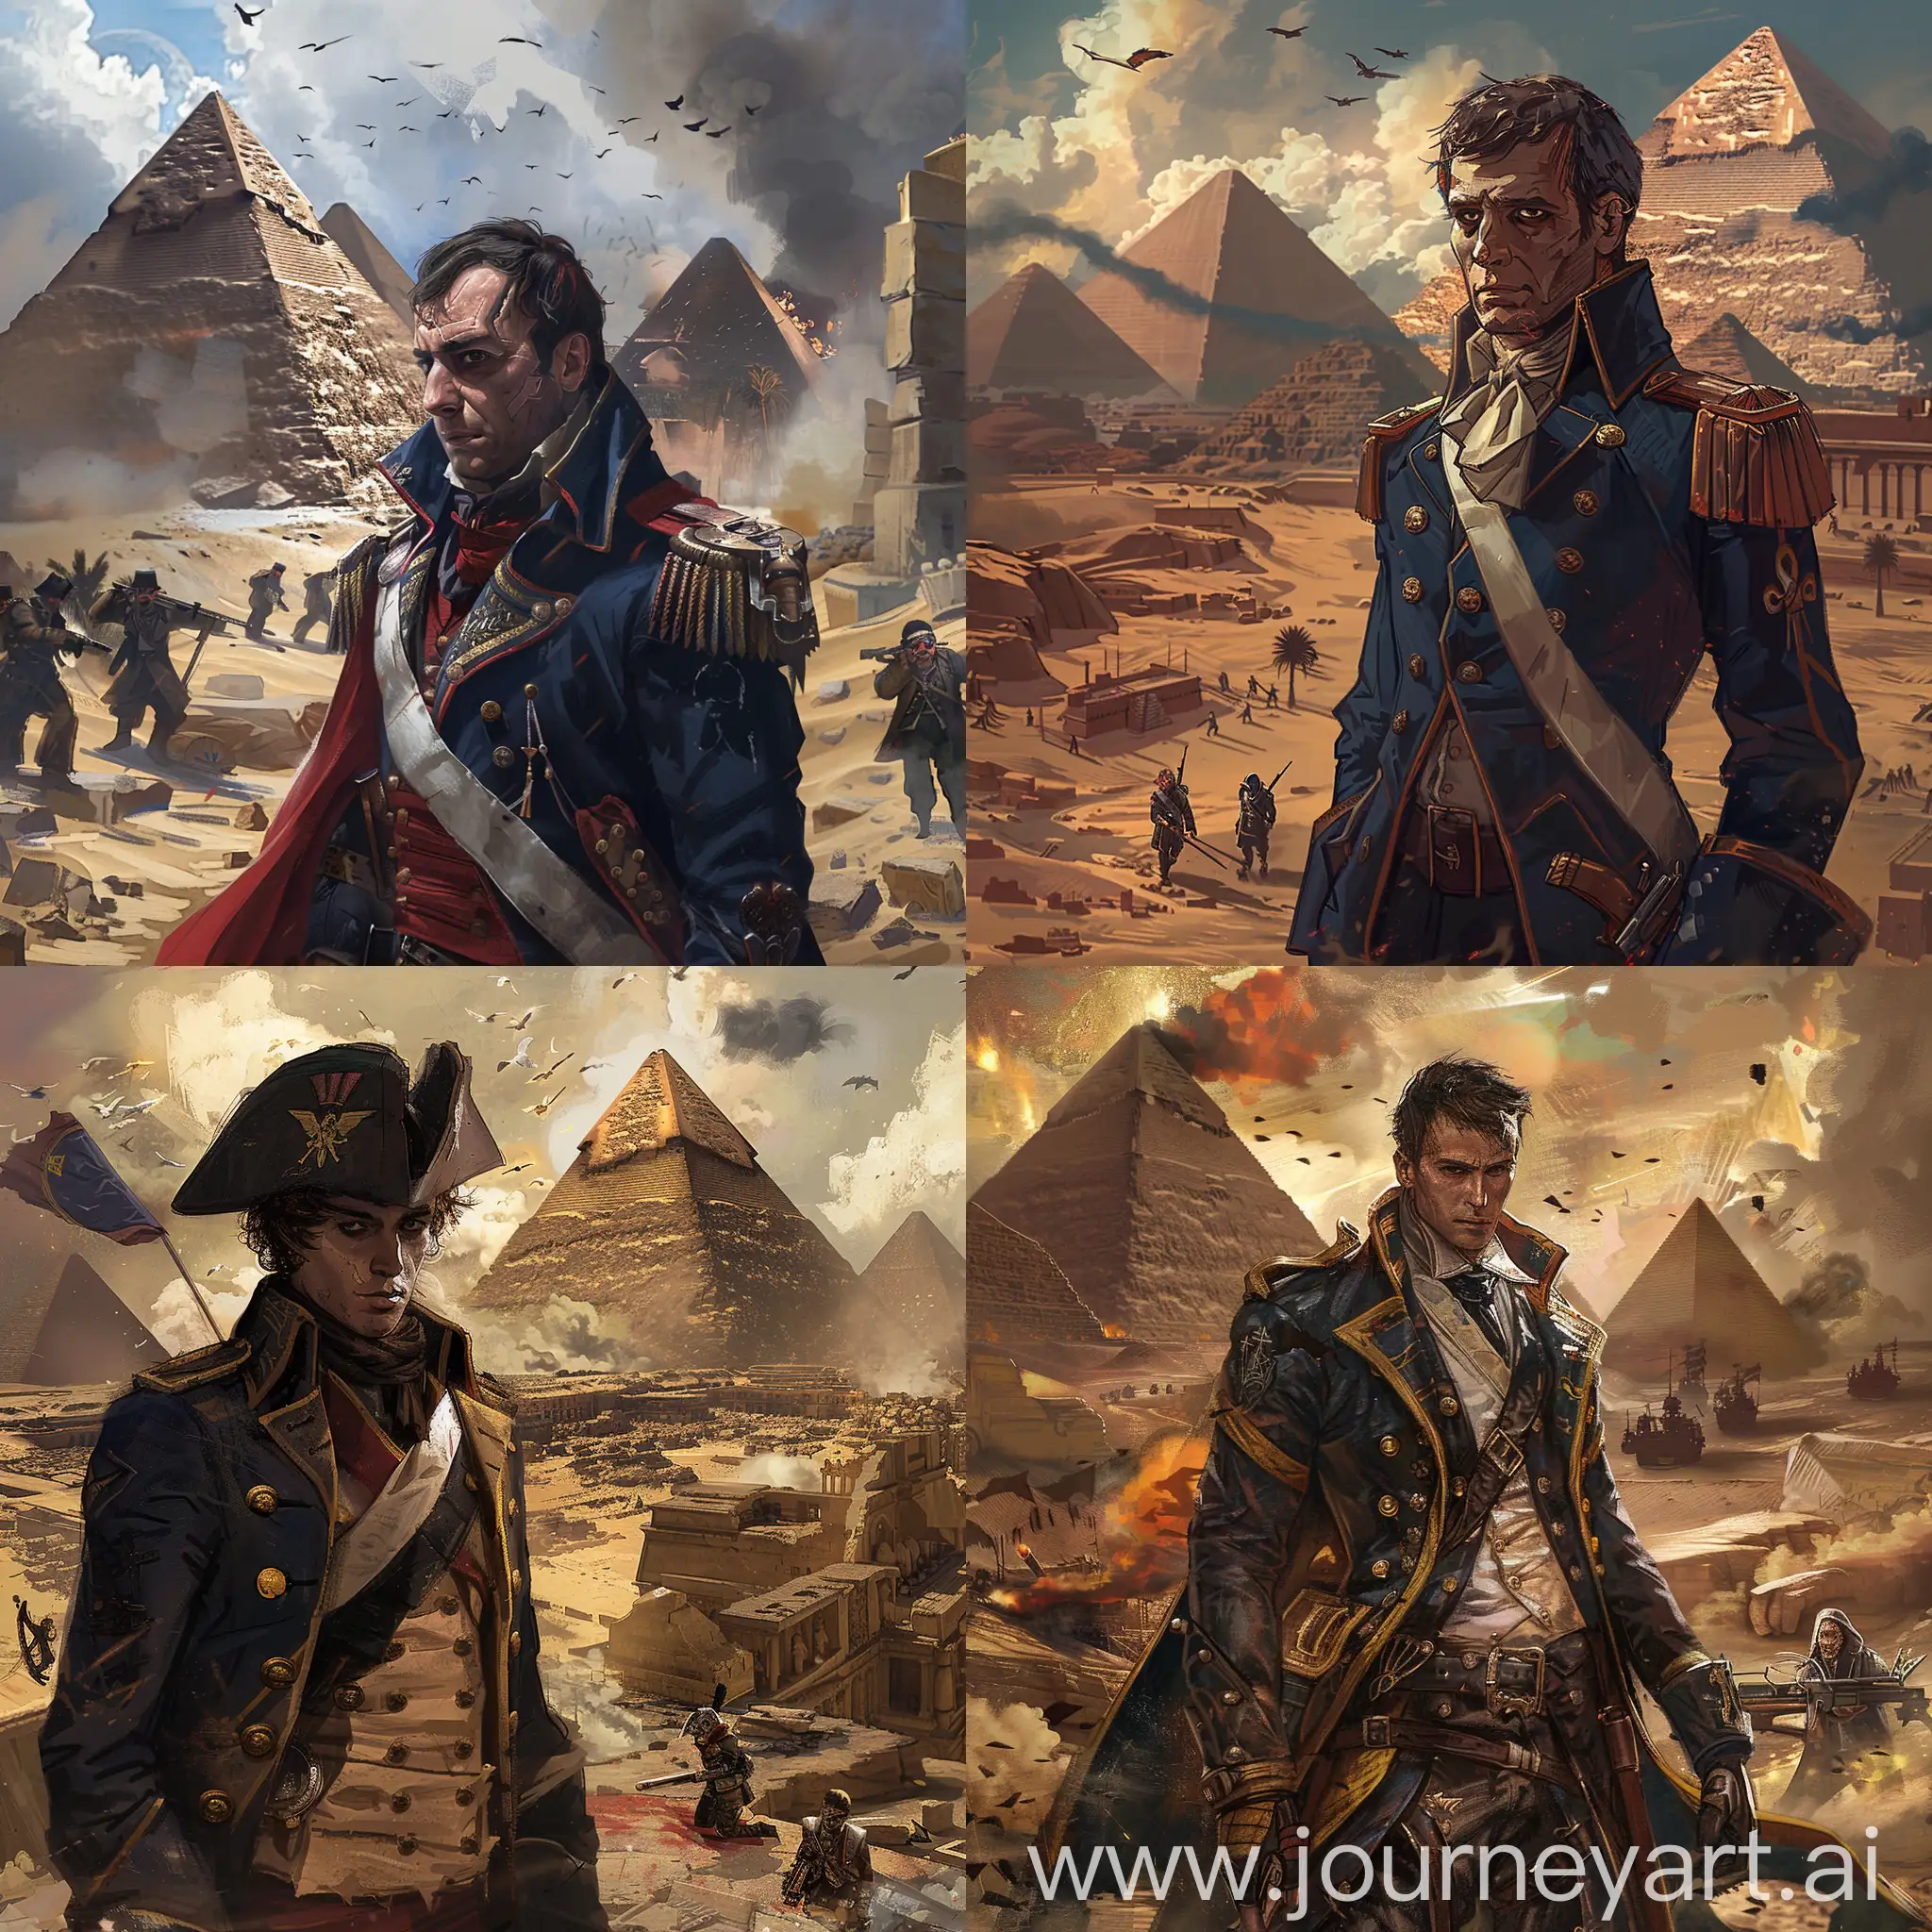 Napoleon Bonaparte, in a steampunk world, where the pyramids of Egypt and psycho's from Borderlands 2 can be seen in de background. Generated in the art-style of the video game Dishonored. 